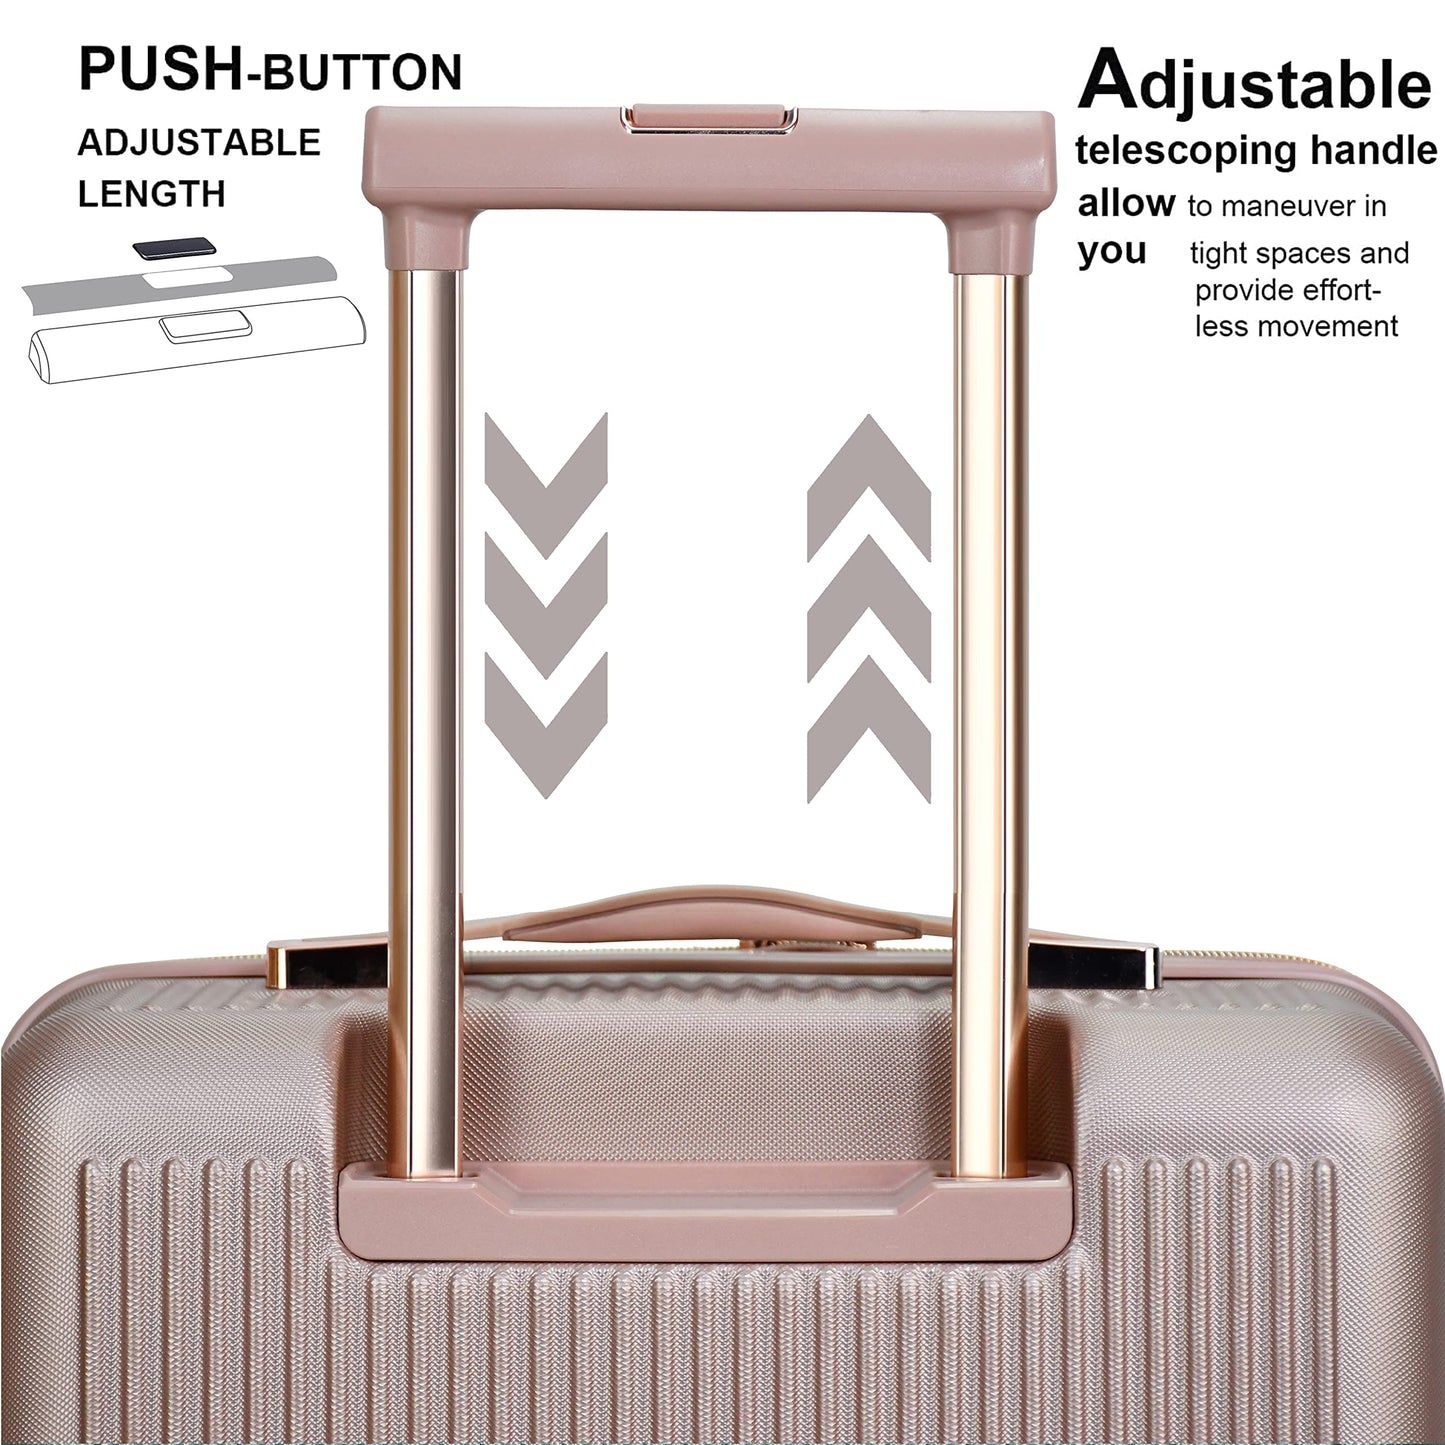 Senator Hard case luggage for Unisex ABS Lightweight 4 Double Wheeled Suitcase with Built-In TSA Type lock A5123